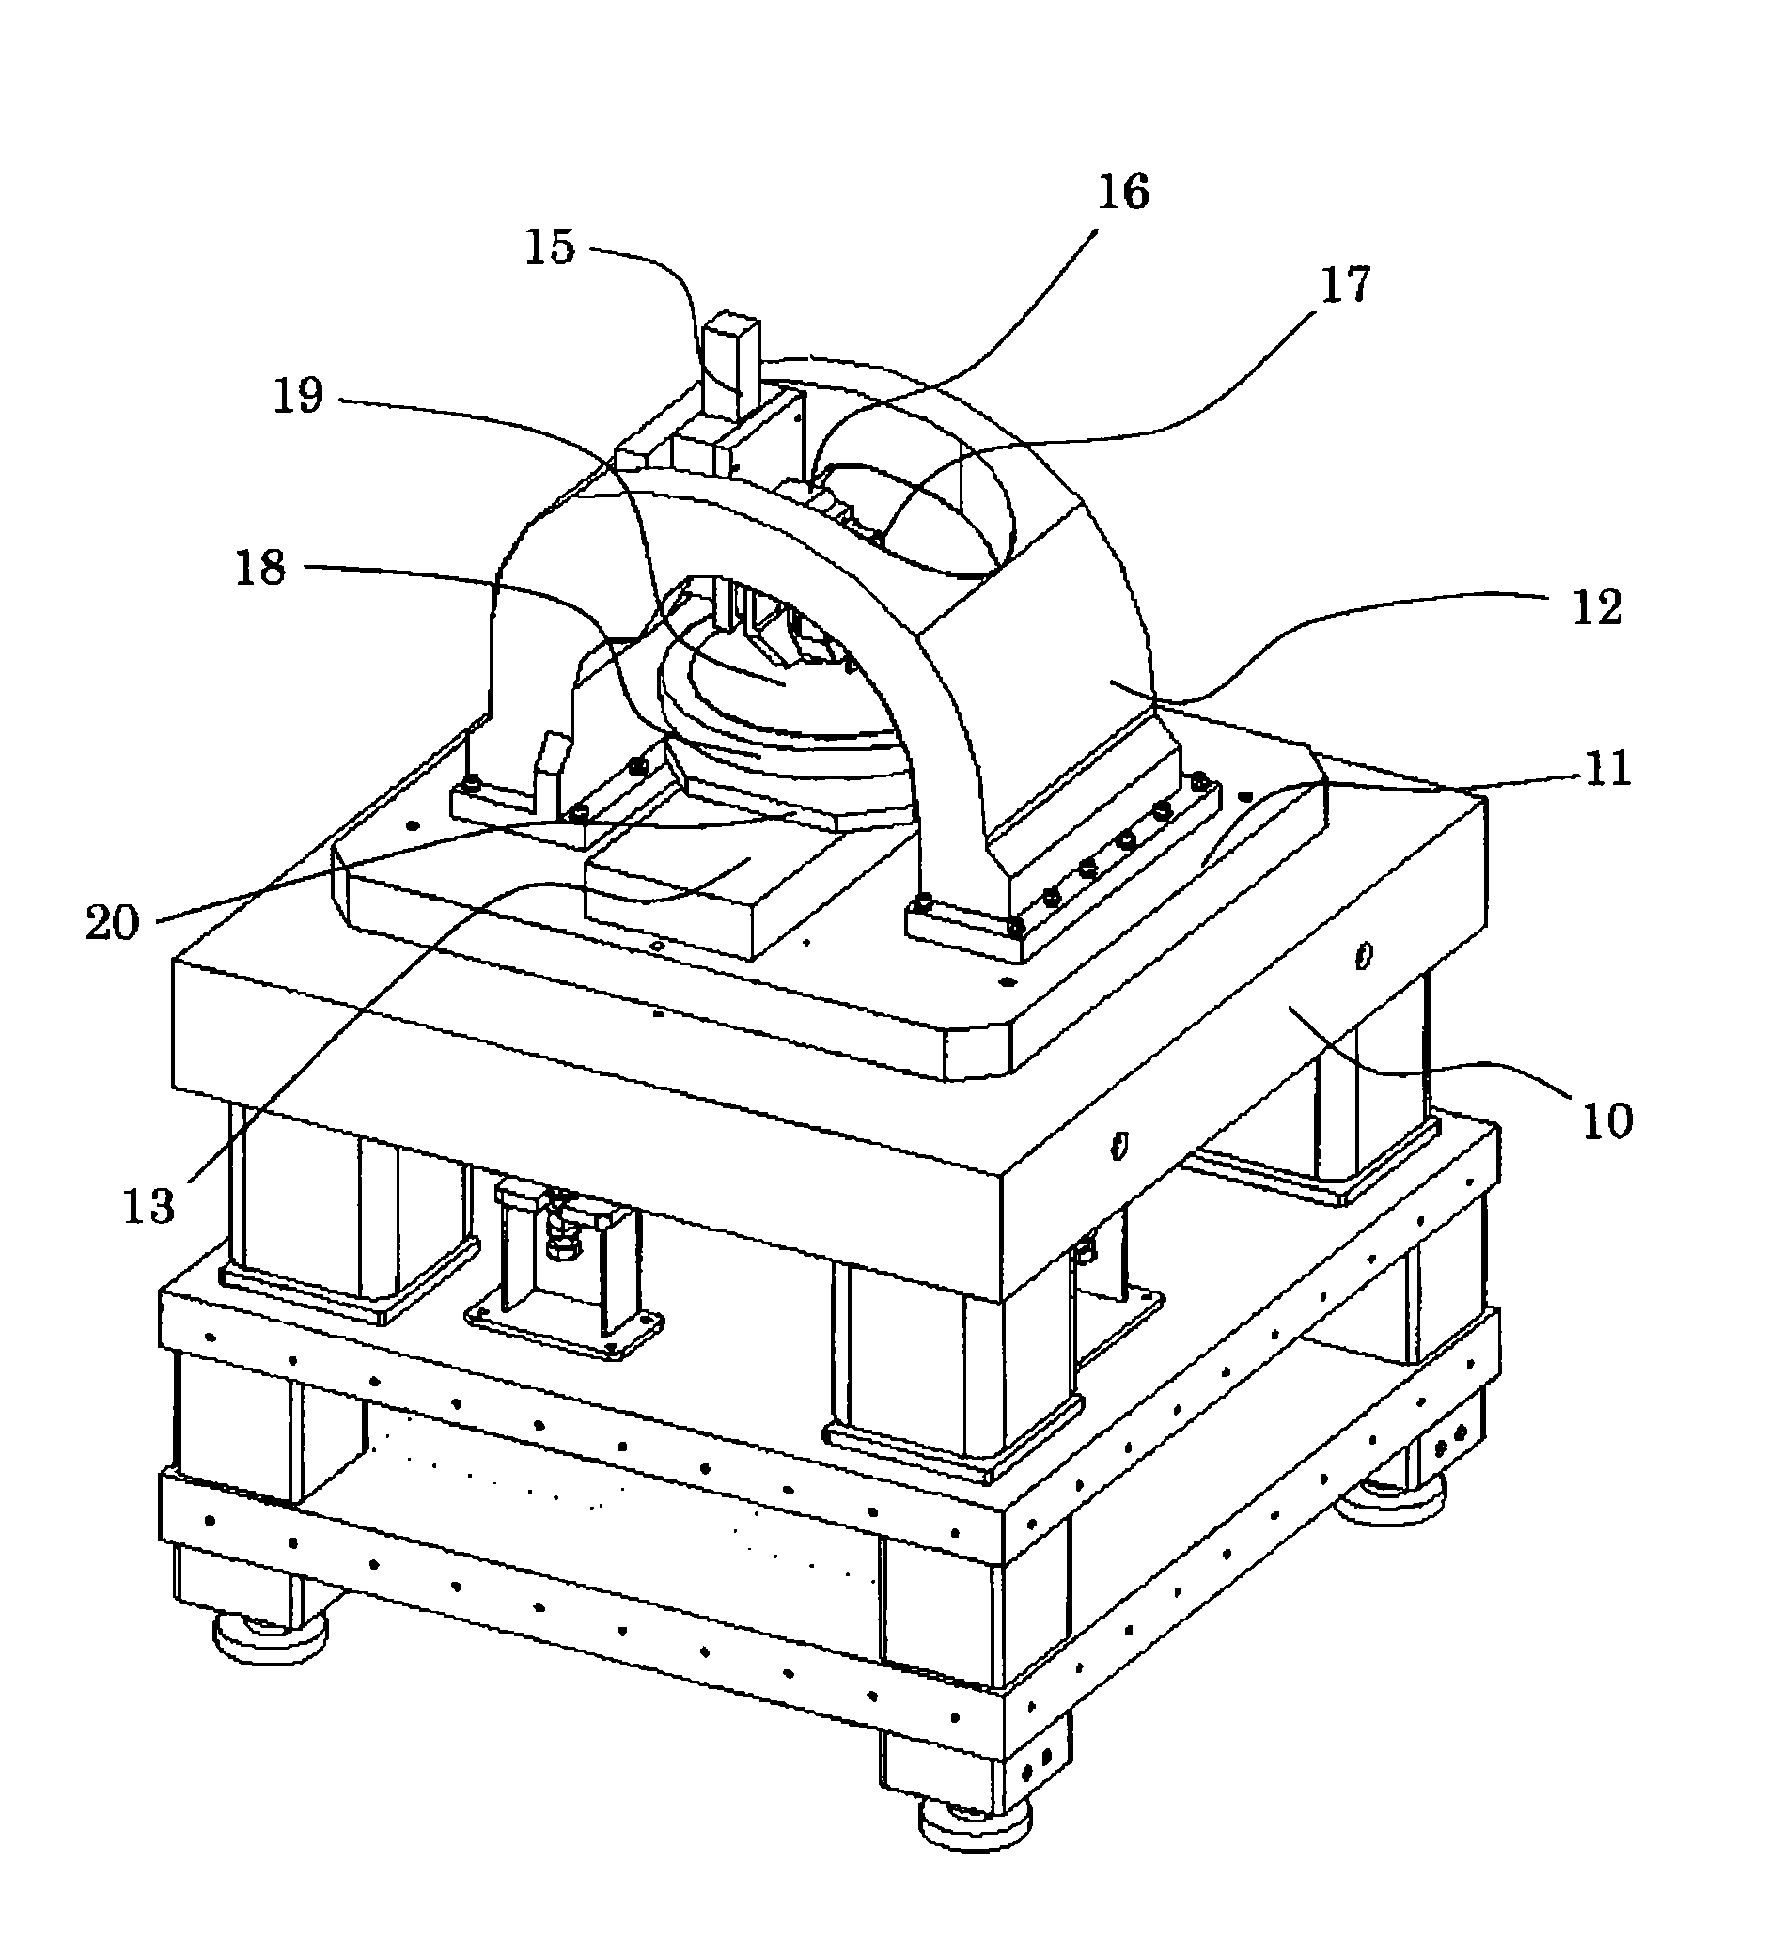 Apparatus structure and scanning probe microscope including apparatus structure